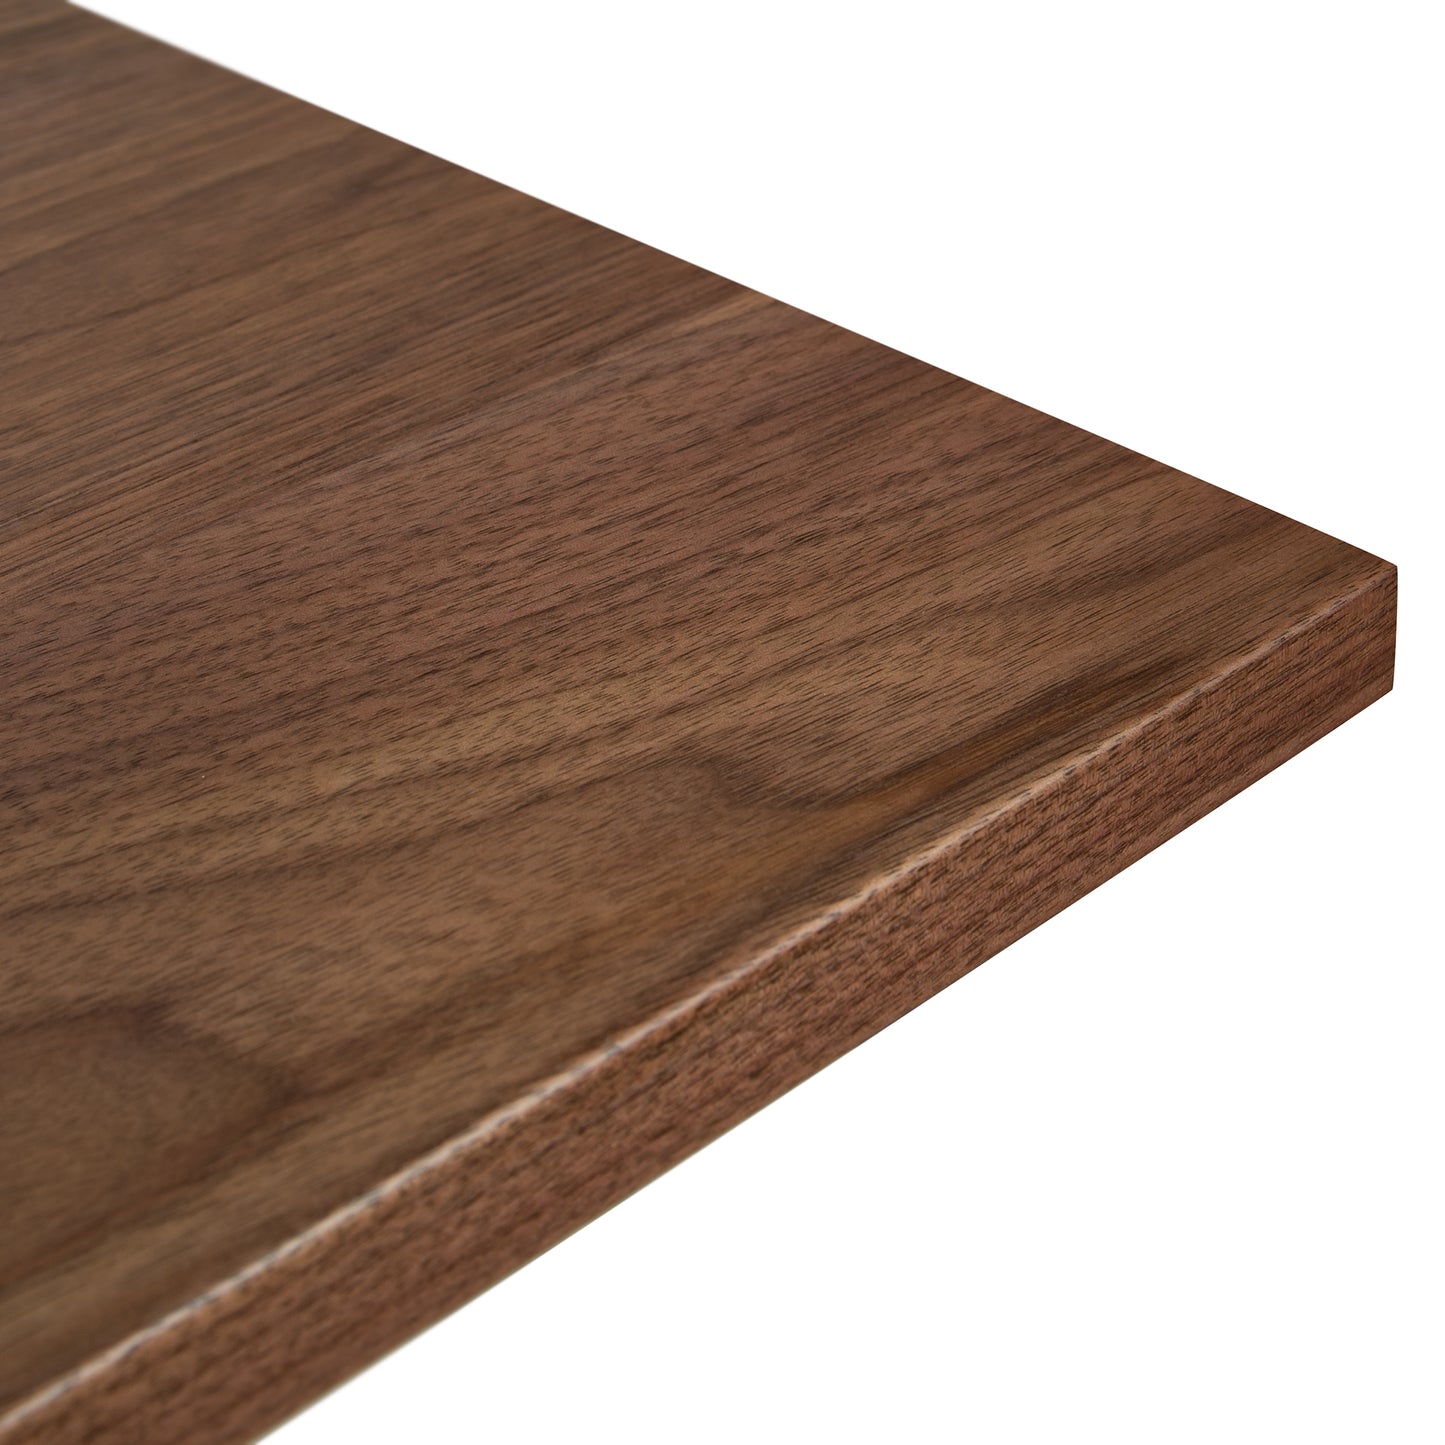 A close up view of a walnut table top.